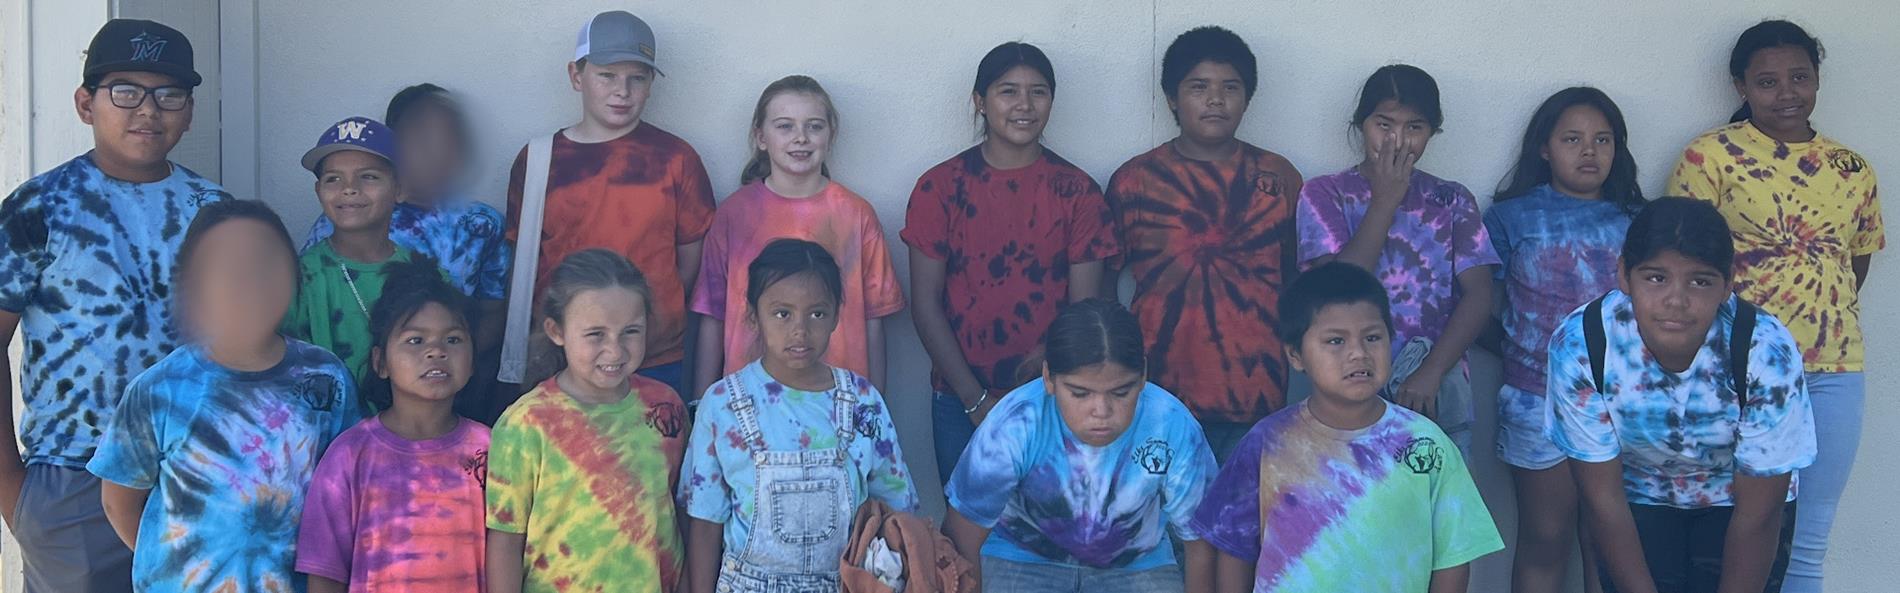 Students wearing the tie-dye shirts they made for their first field trip of Camp to Sutter's Fort/California Indian Museum